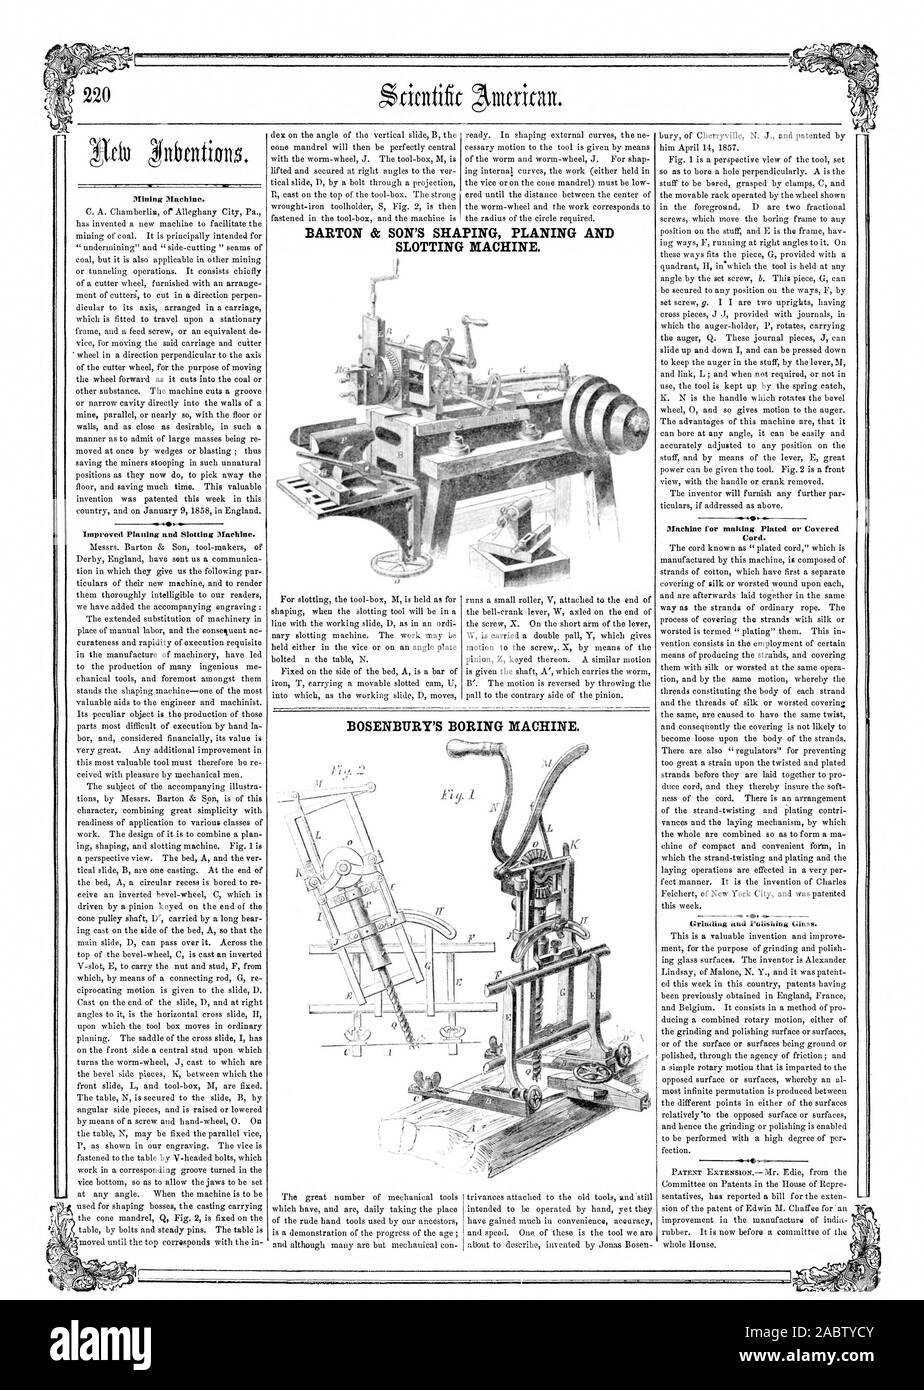 Mining Machine. Improved Platting and Slotting Machine. Machine for snaking Plated or Covered Cord. .-gss Grinding and Polishing Glass. BARTON & SON'S SHAPING PLANING AND SLOTTING MACHINE. BOSENBURY'S BORING MACHINE., scientific american, 1858-03-20 Stock Photo